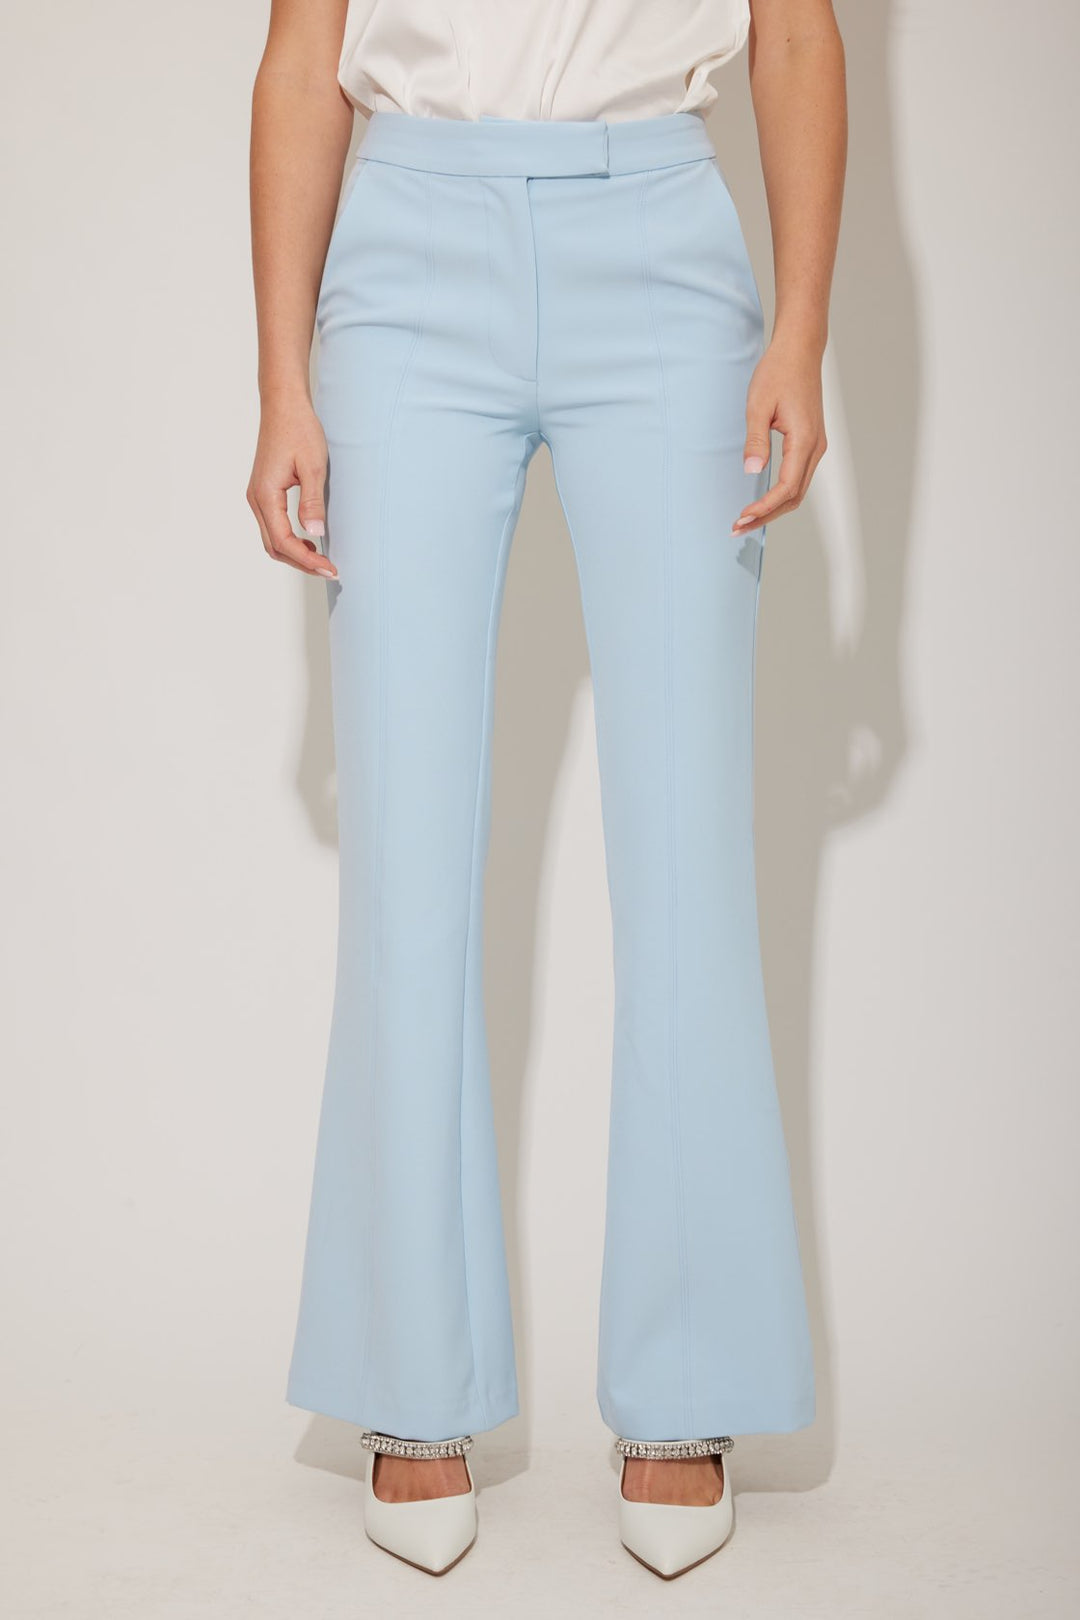 LUCCA CREPE PANT - FRENCH BLUE